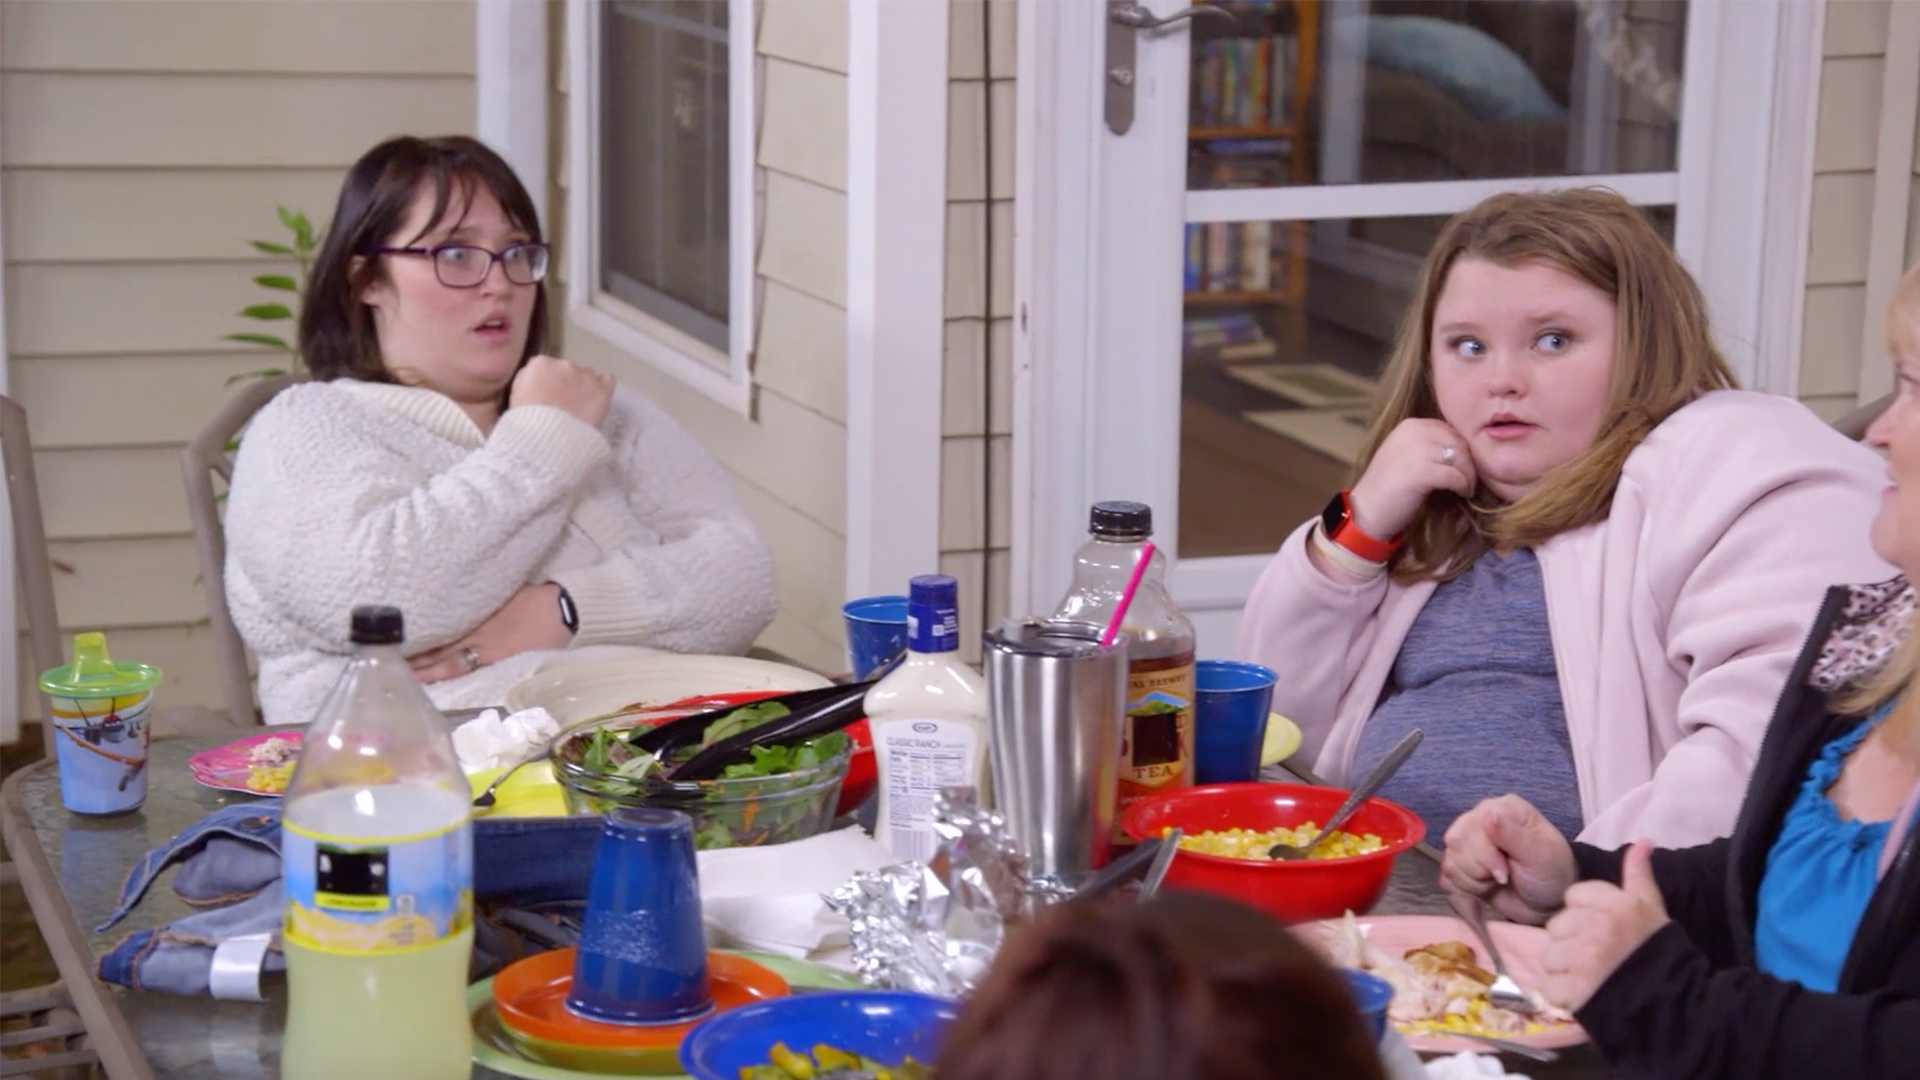 Watch The Girls Are Shocked by June's Return! | Mama June: From Not to Hot Video Extras